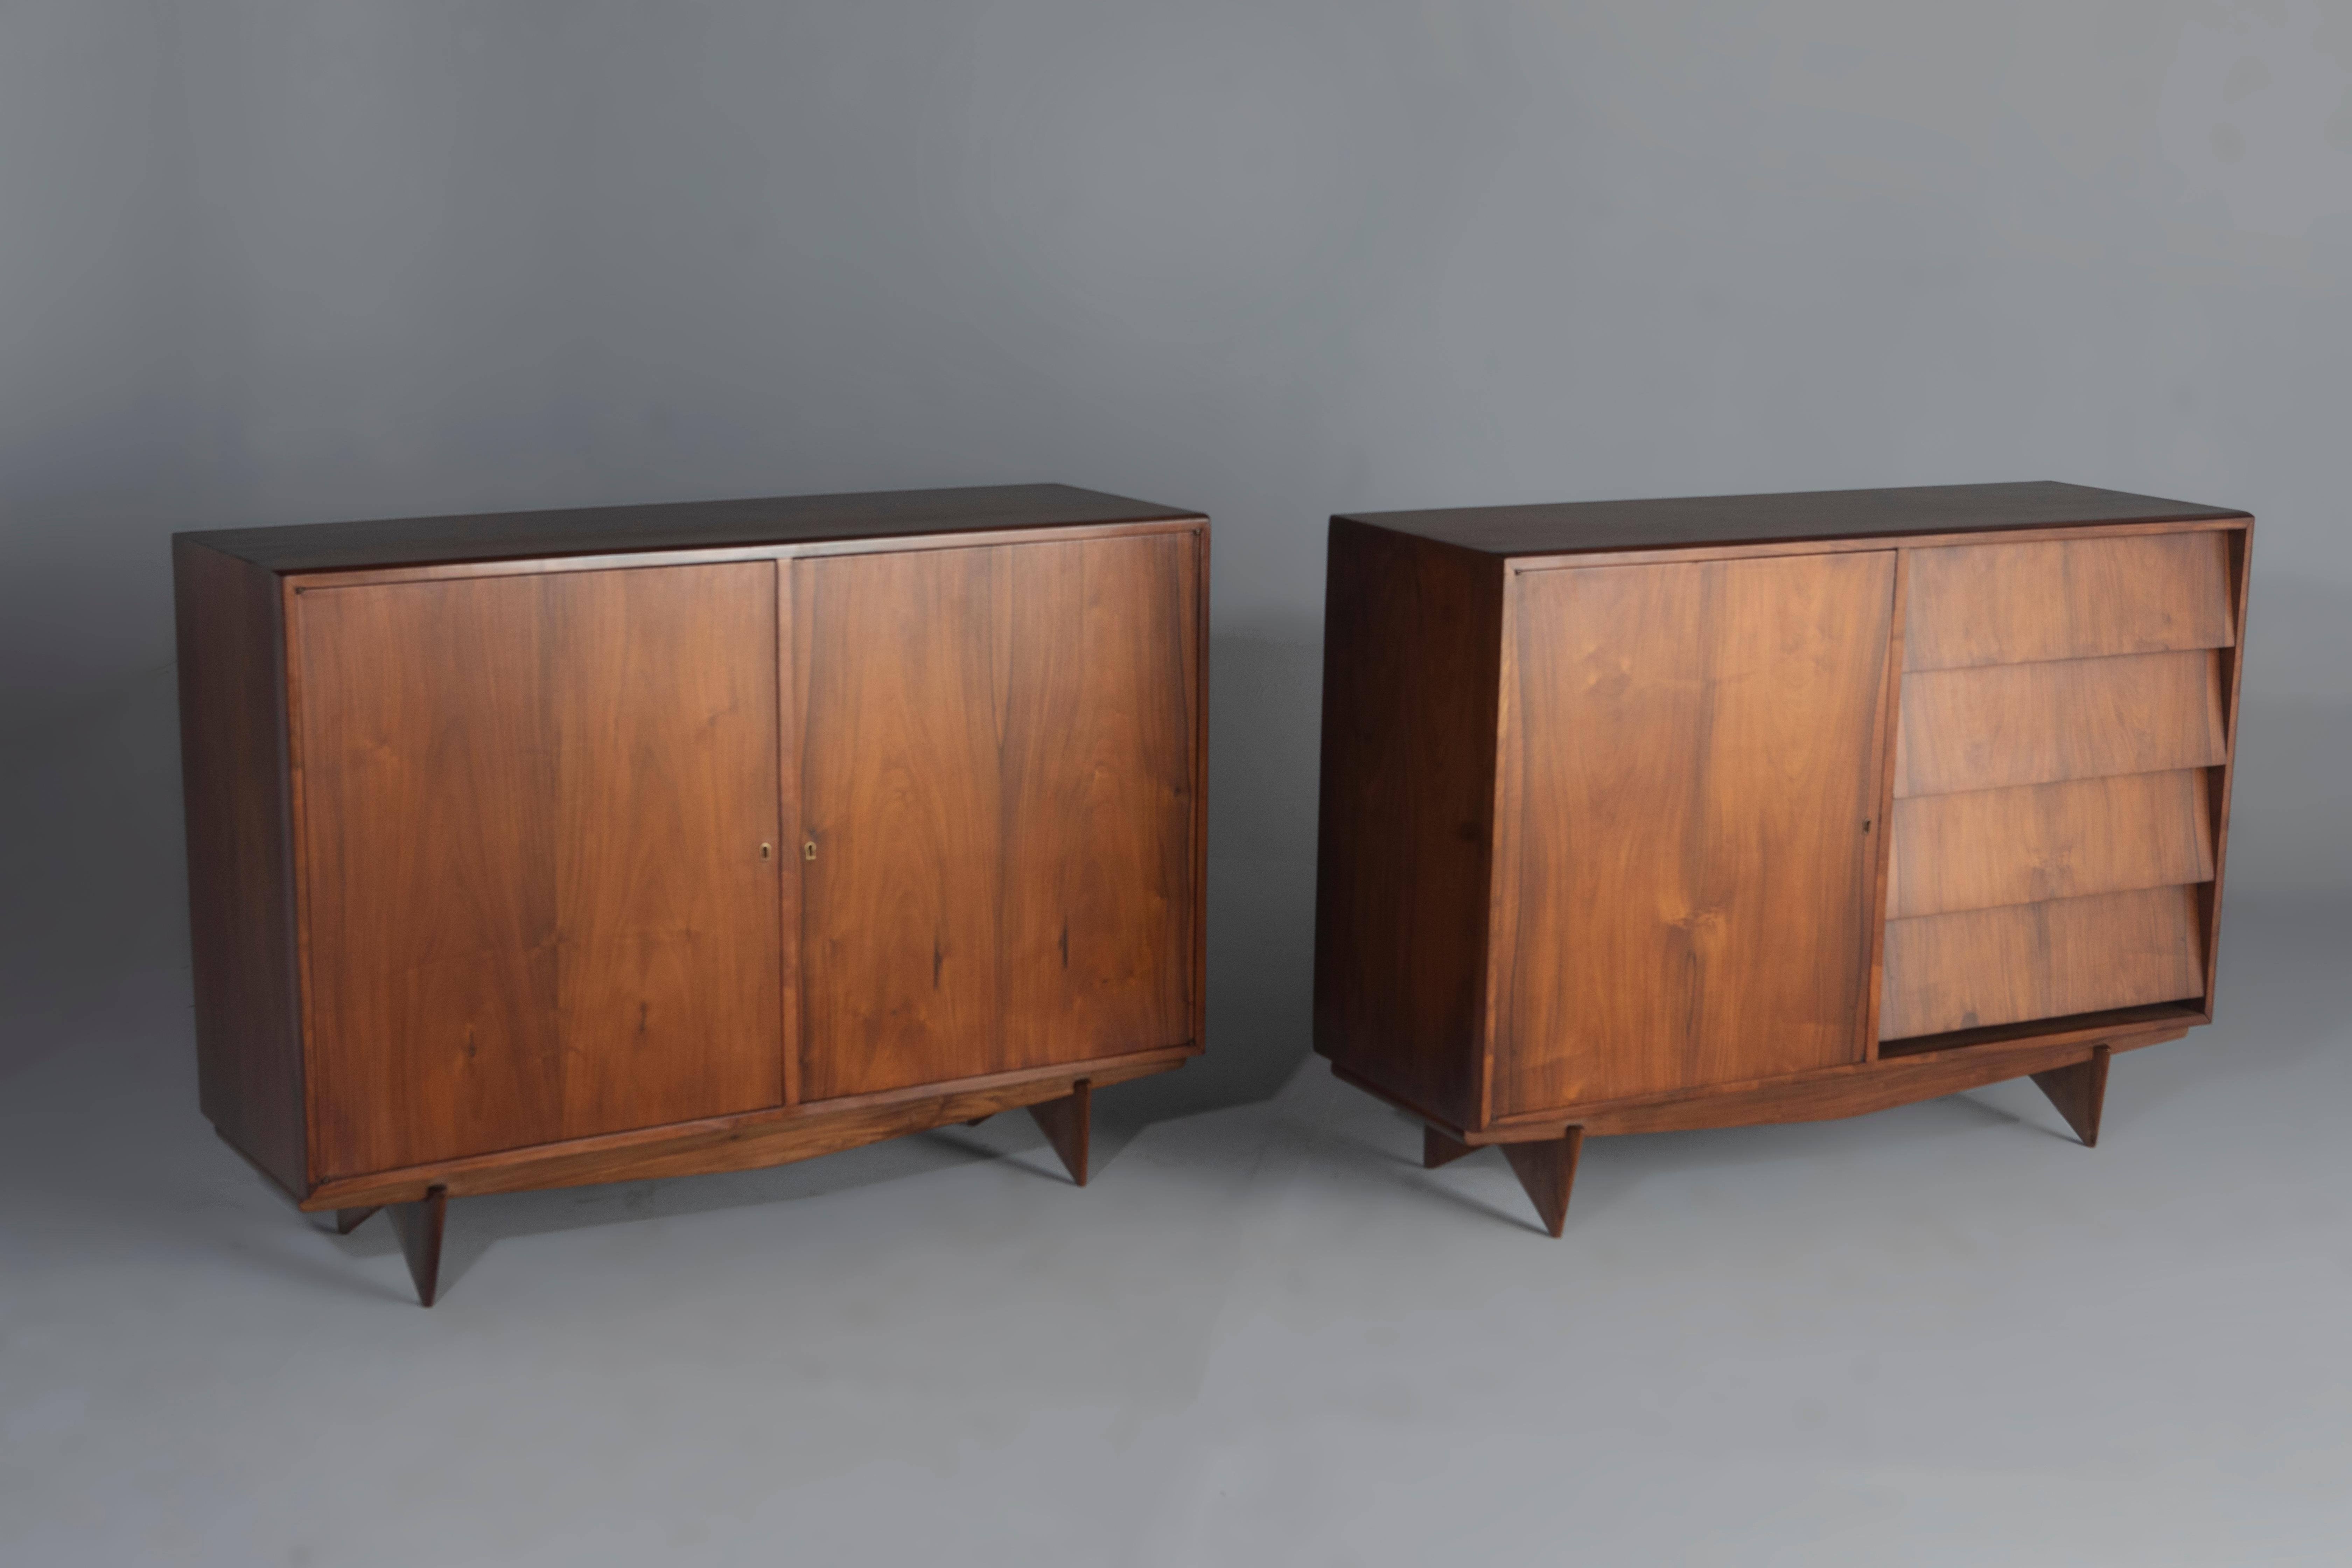 Mid-Century Modern Pair of Sideboards by Carlo Hauner, 1950s

Pair of sideboards manufactured by Carlo Hauner in the 50s.
Made of solid wood, the pair consists of one sideboard with 4 drawers and a storage door with shelf, while the other has two